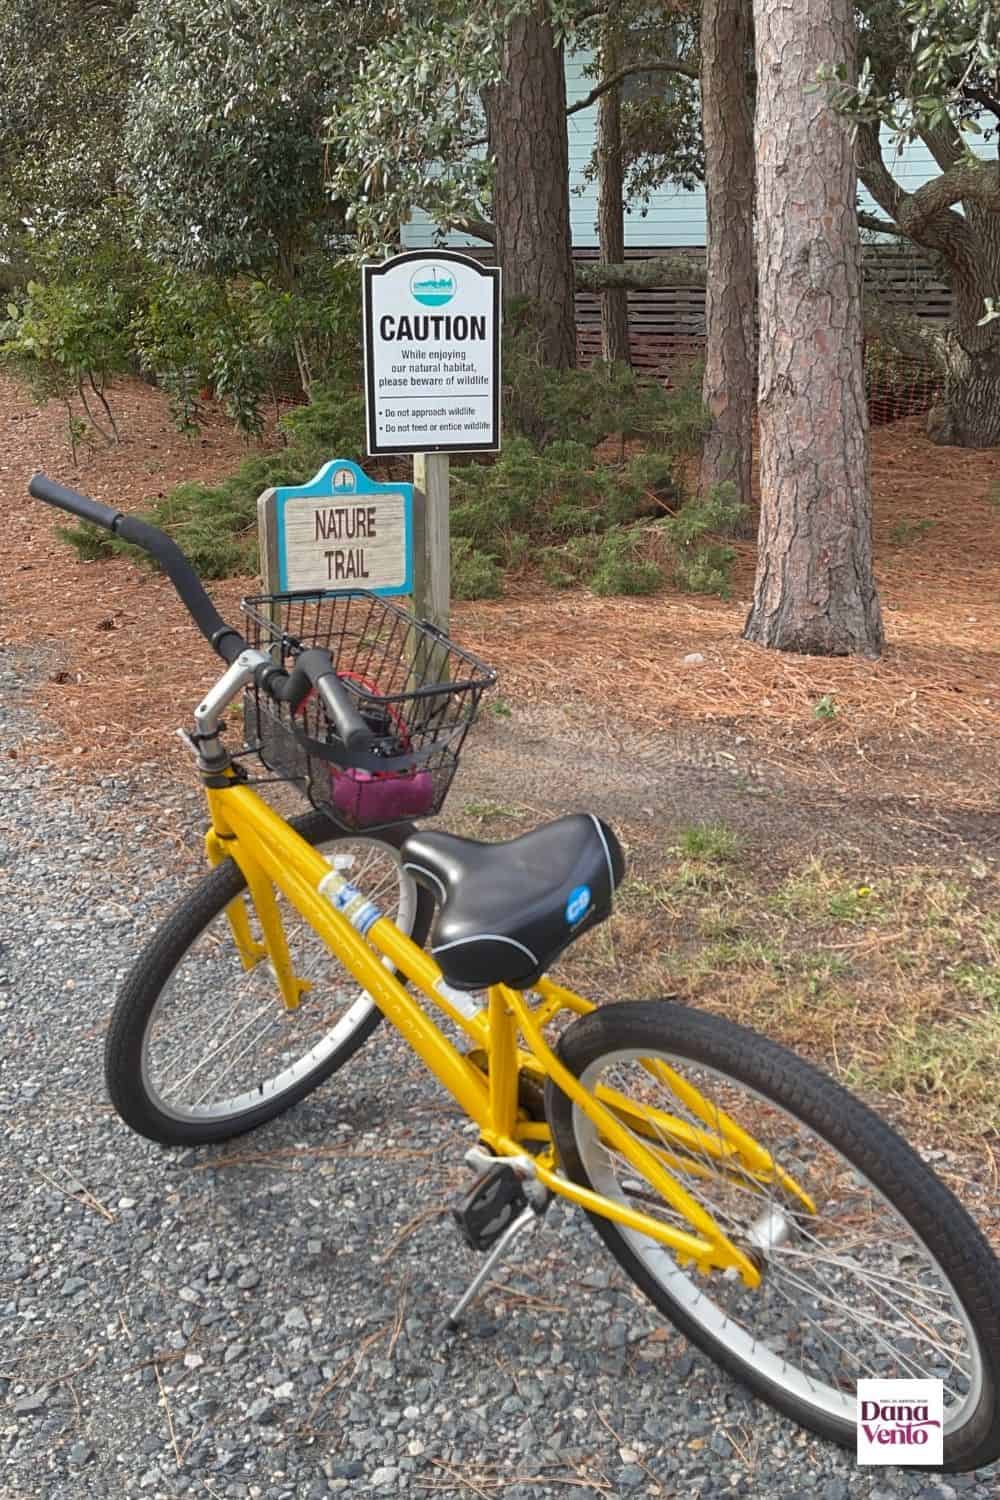 Bike with basket from Outer Banks premier outfitter on biking trail in Corolla